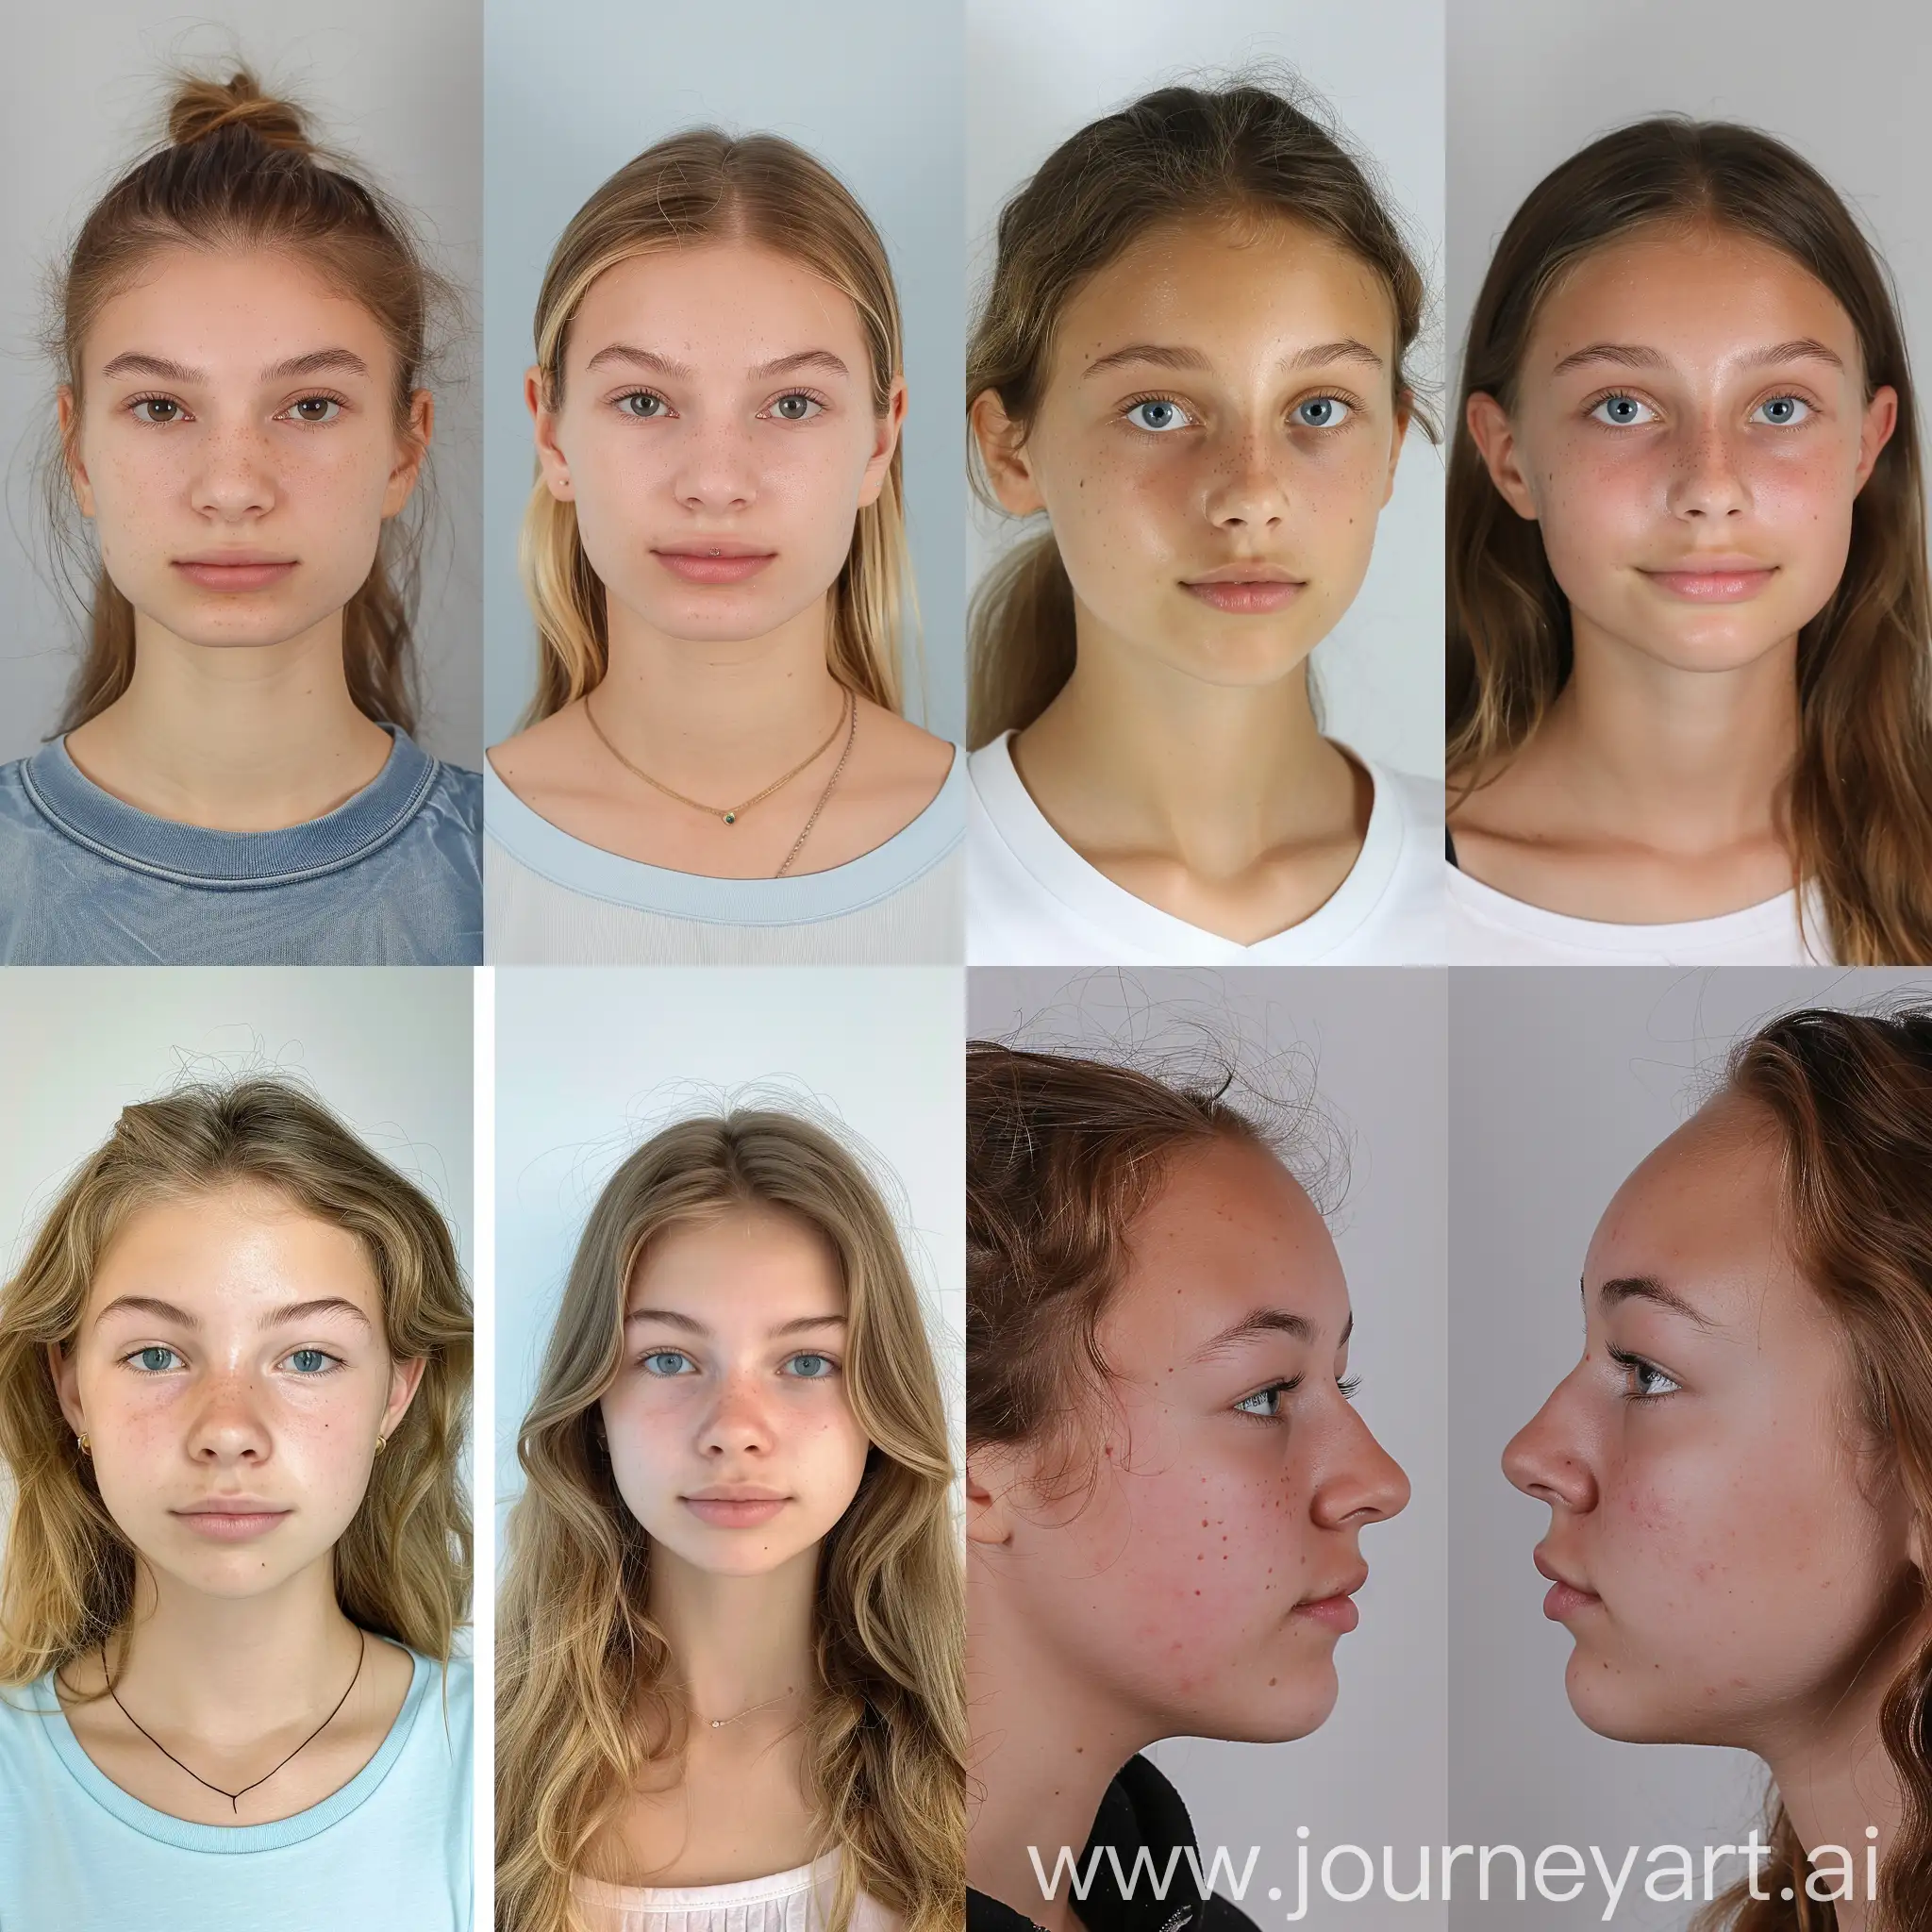 Teenage-Girl-Before-and-After-Rhinoplasty-Surgery